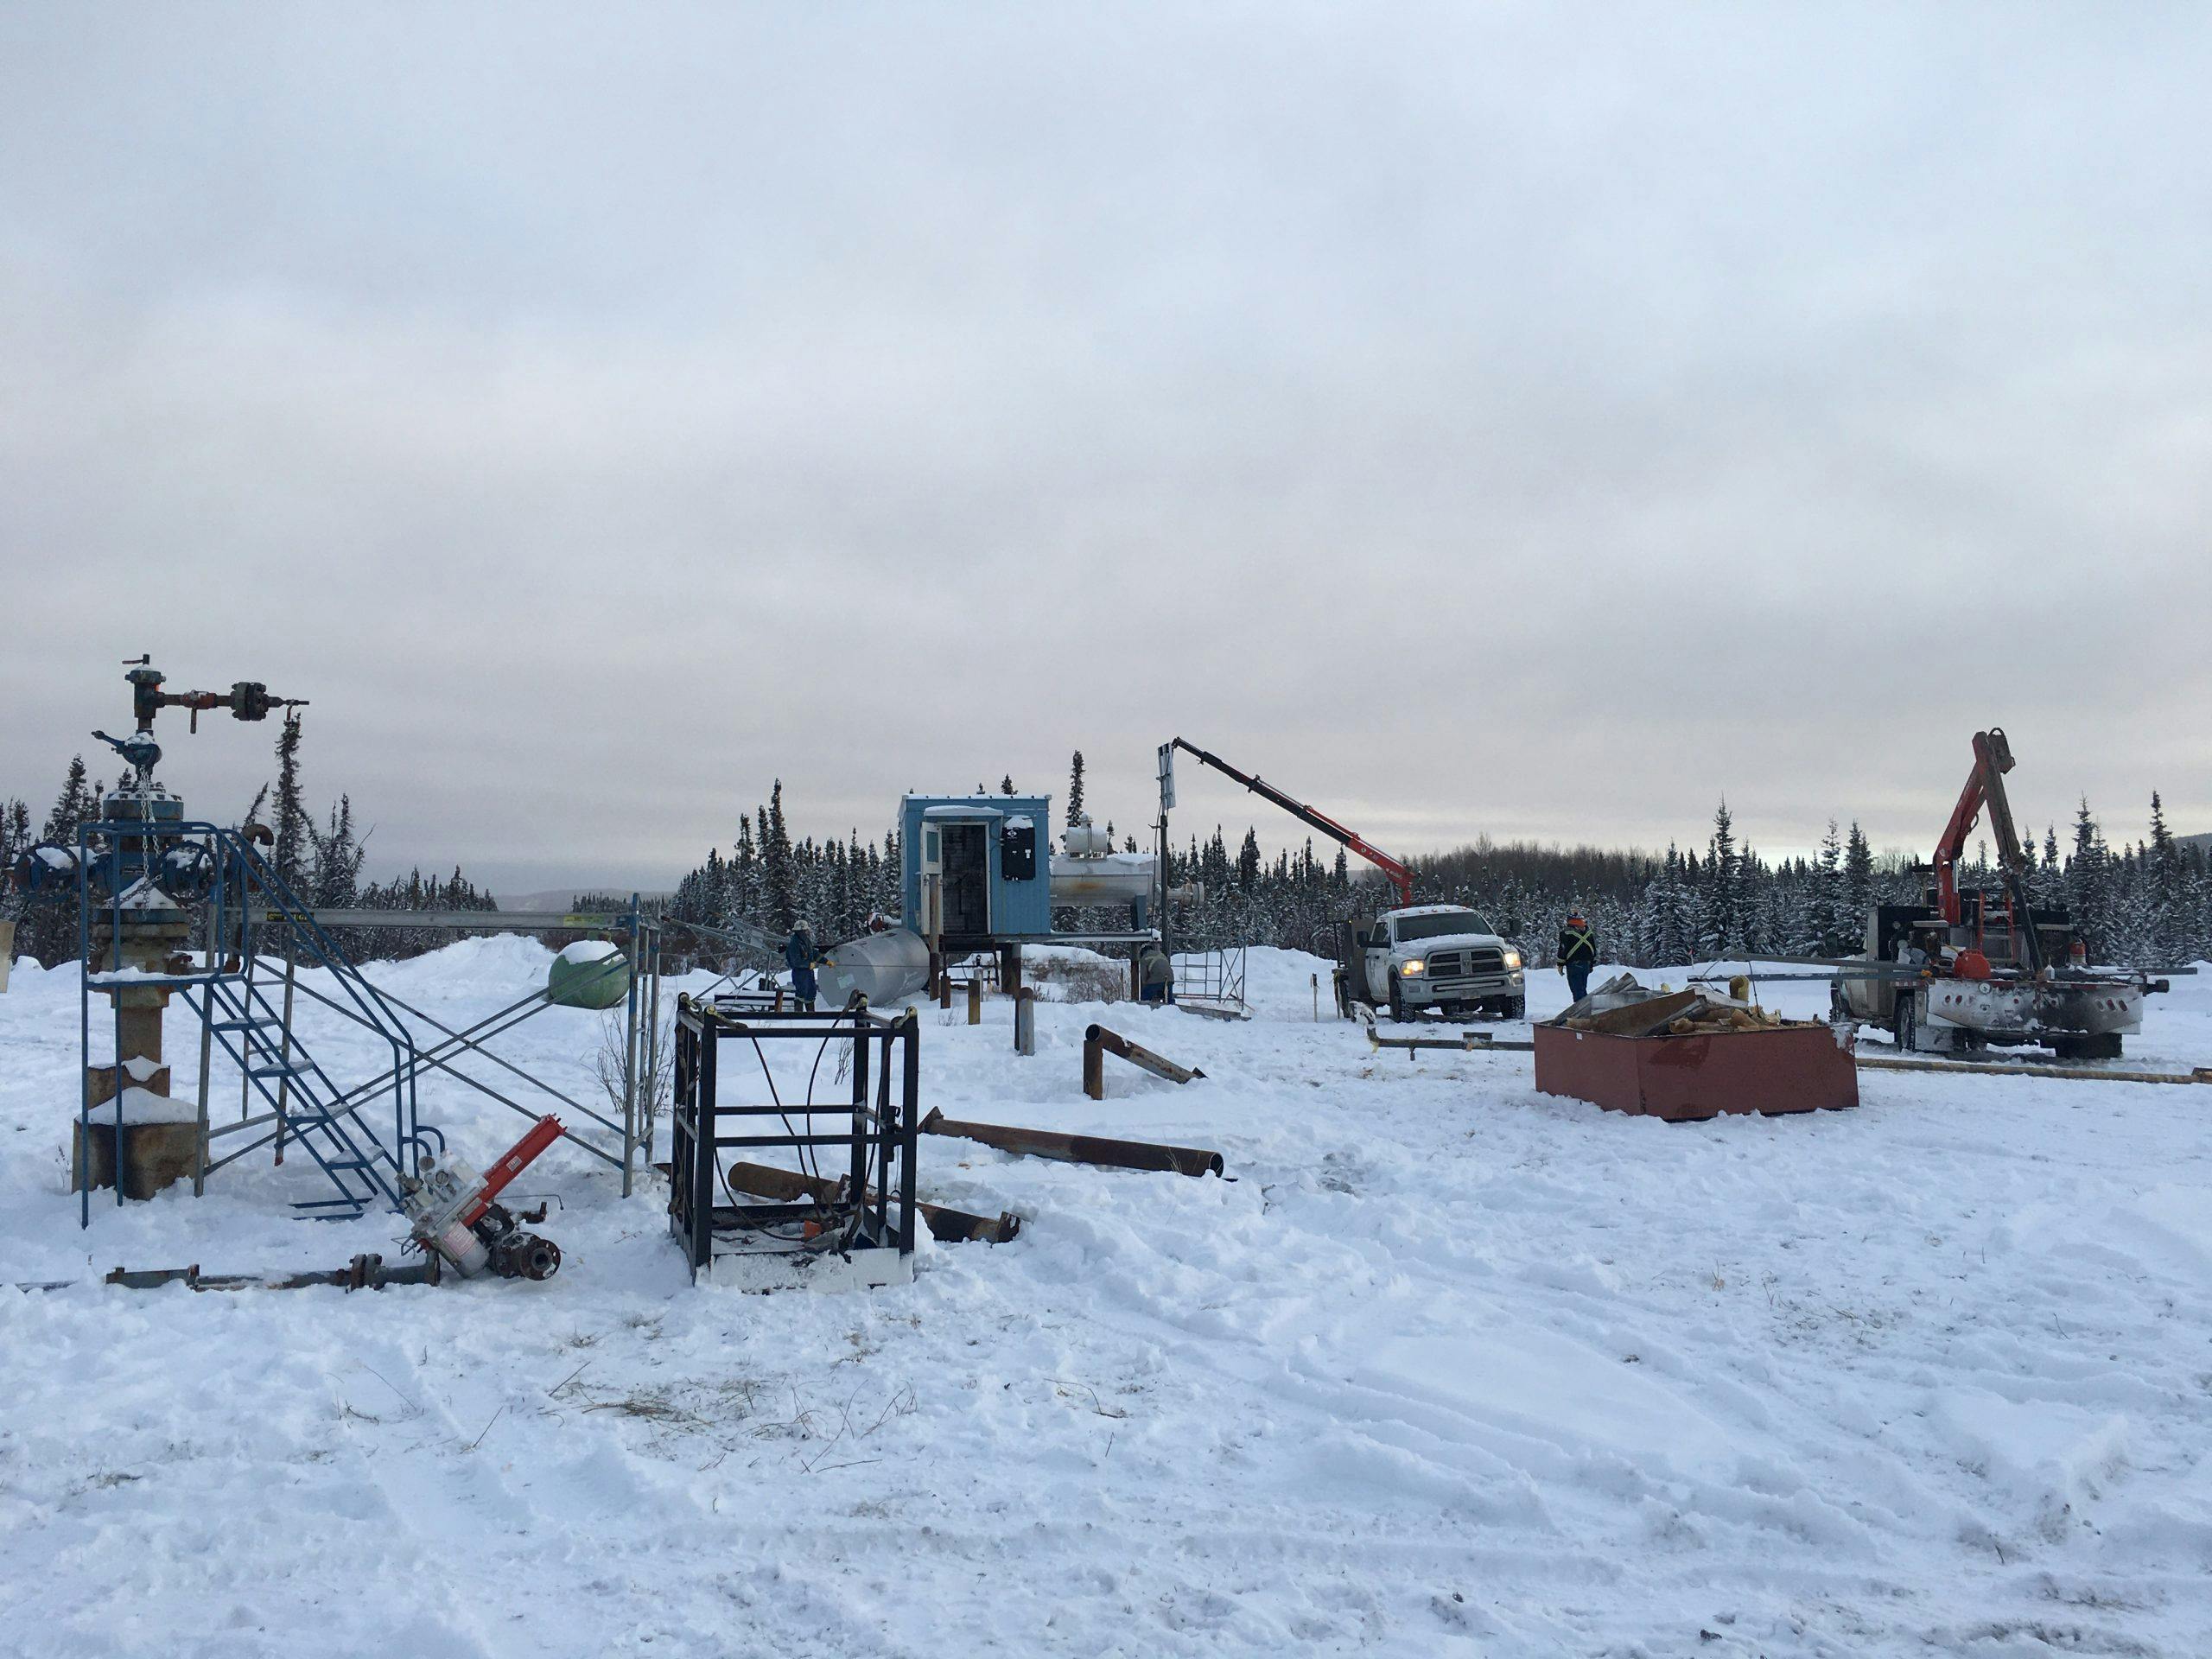 Wellsite decommissioning crew working in winter conditions